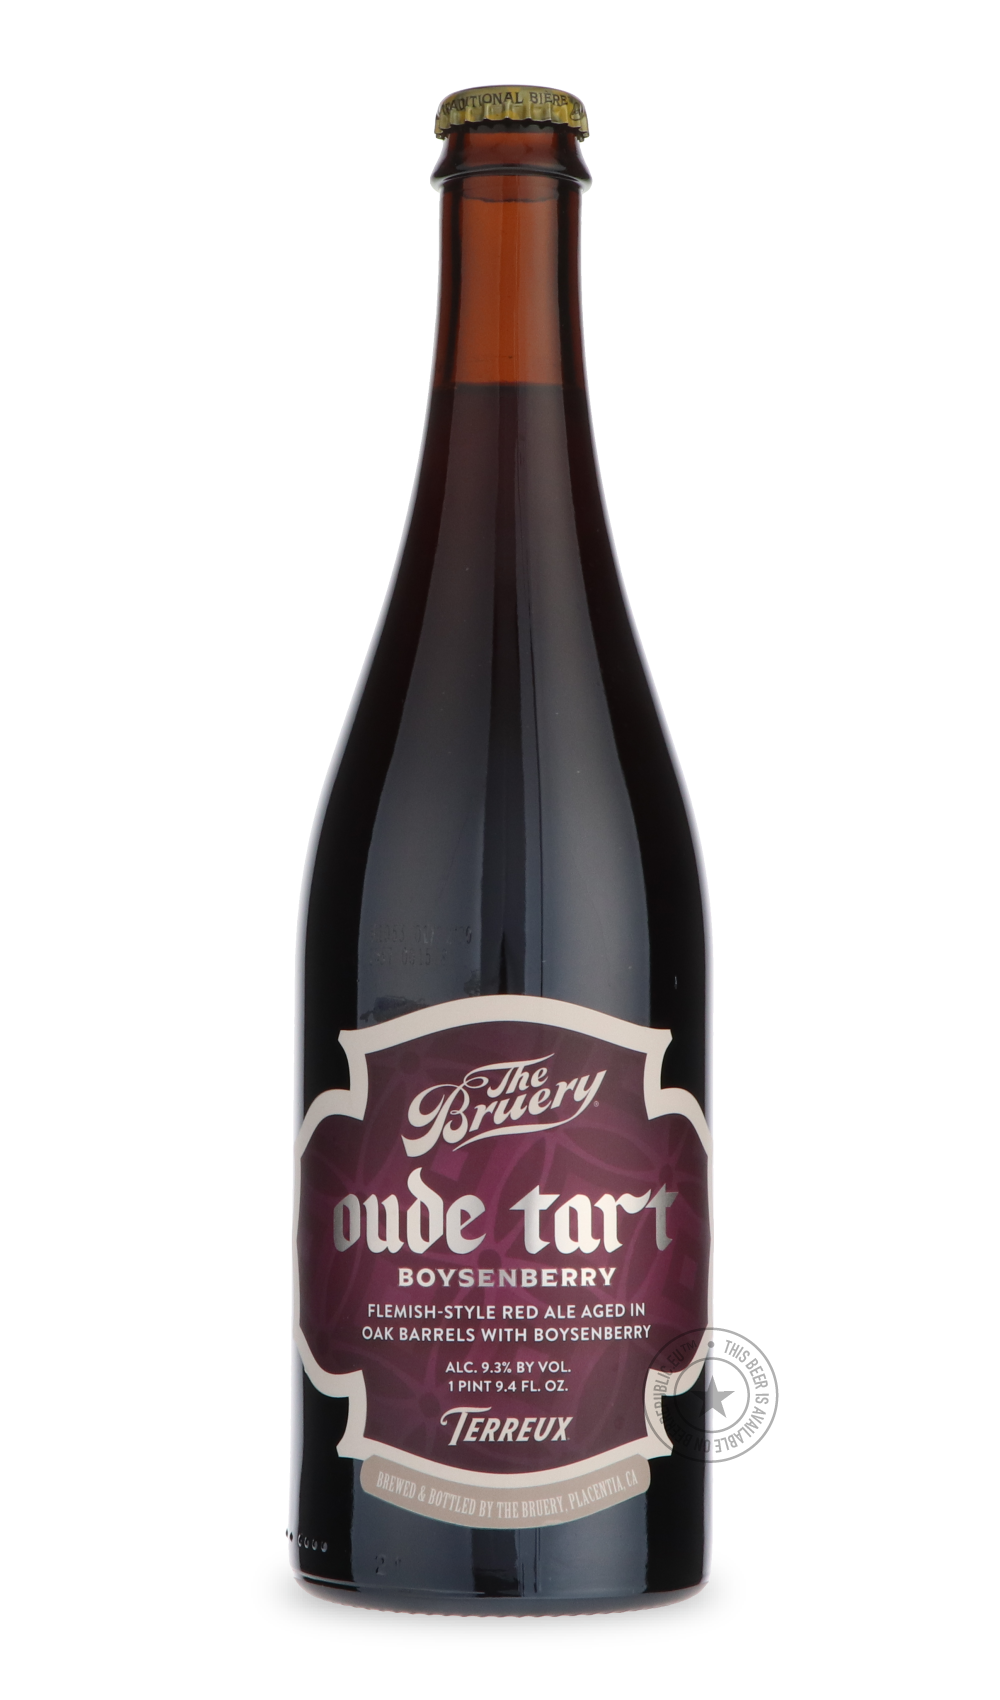 -The Bruery- Oude Tart Boysenberry-Sour / Wild & Fruity- Only @ Beer Republic - The best online beer store for American & Canadian craft beer - Buy beer online from the USA and Canada - Bier online kopen - Amerikaans bier kopen - Craft beer store - Craft beer kopen - Amerikanisch bier kaufen - Bier online kaufen - Acheter biere online - IPA - Stout - Porter - New England IPA - Hazy IPA - Imperial Stout - Barrel Aged - Barrel Aged Imperial Stout - Brown - Dark beer - Blond - Blonde - Pilsner - Lager - Wheat 